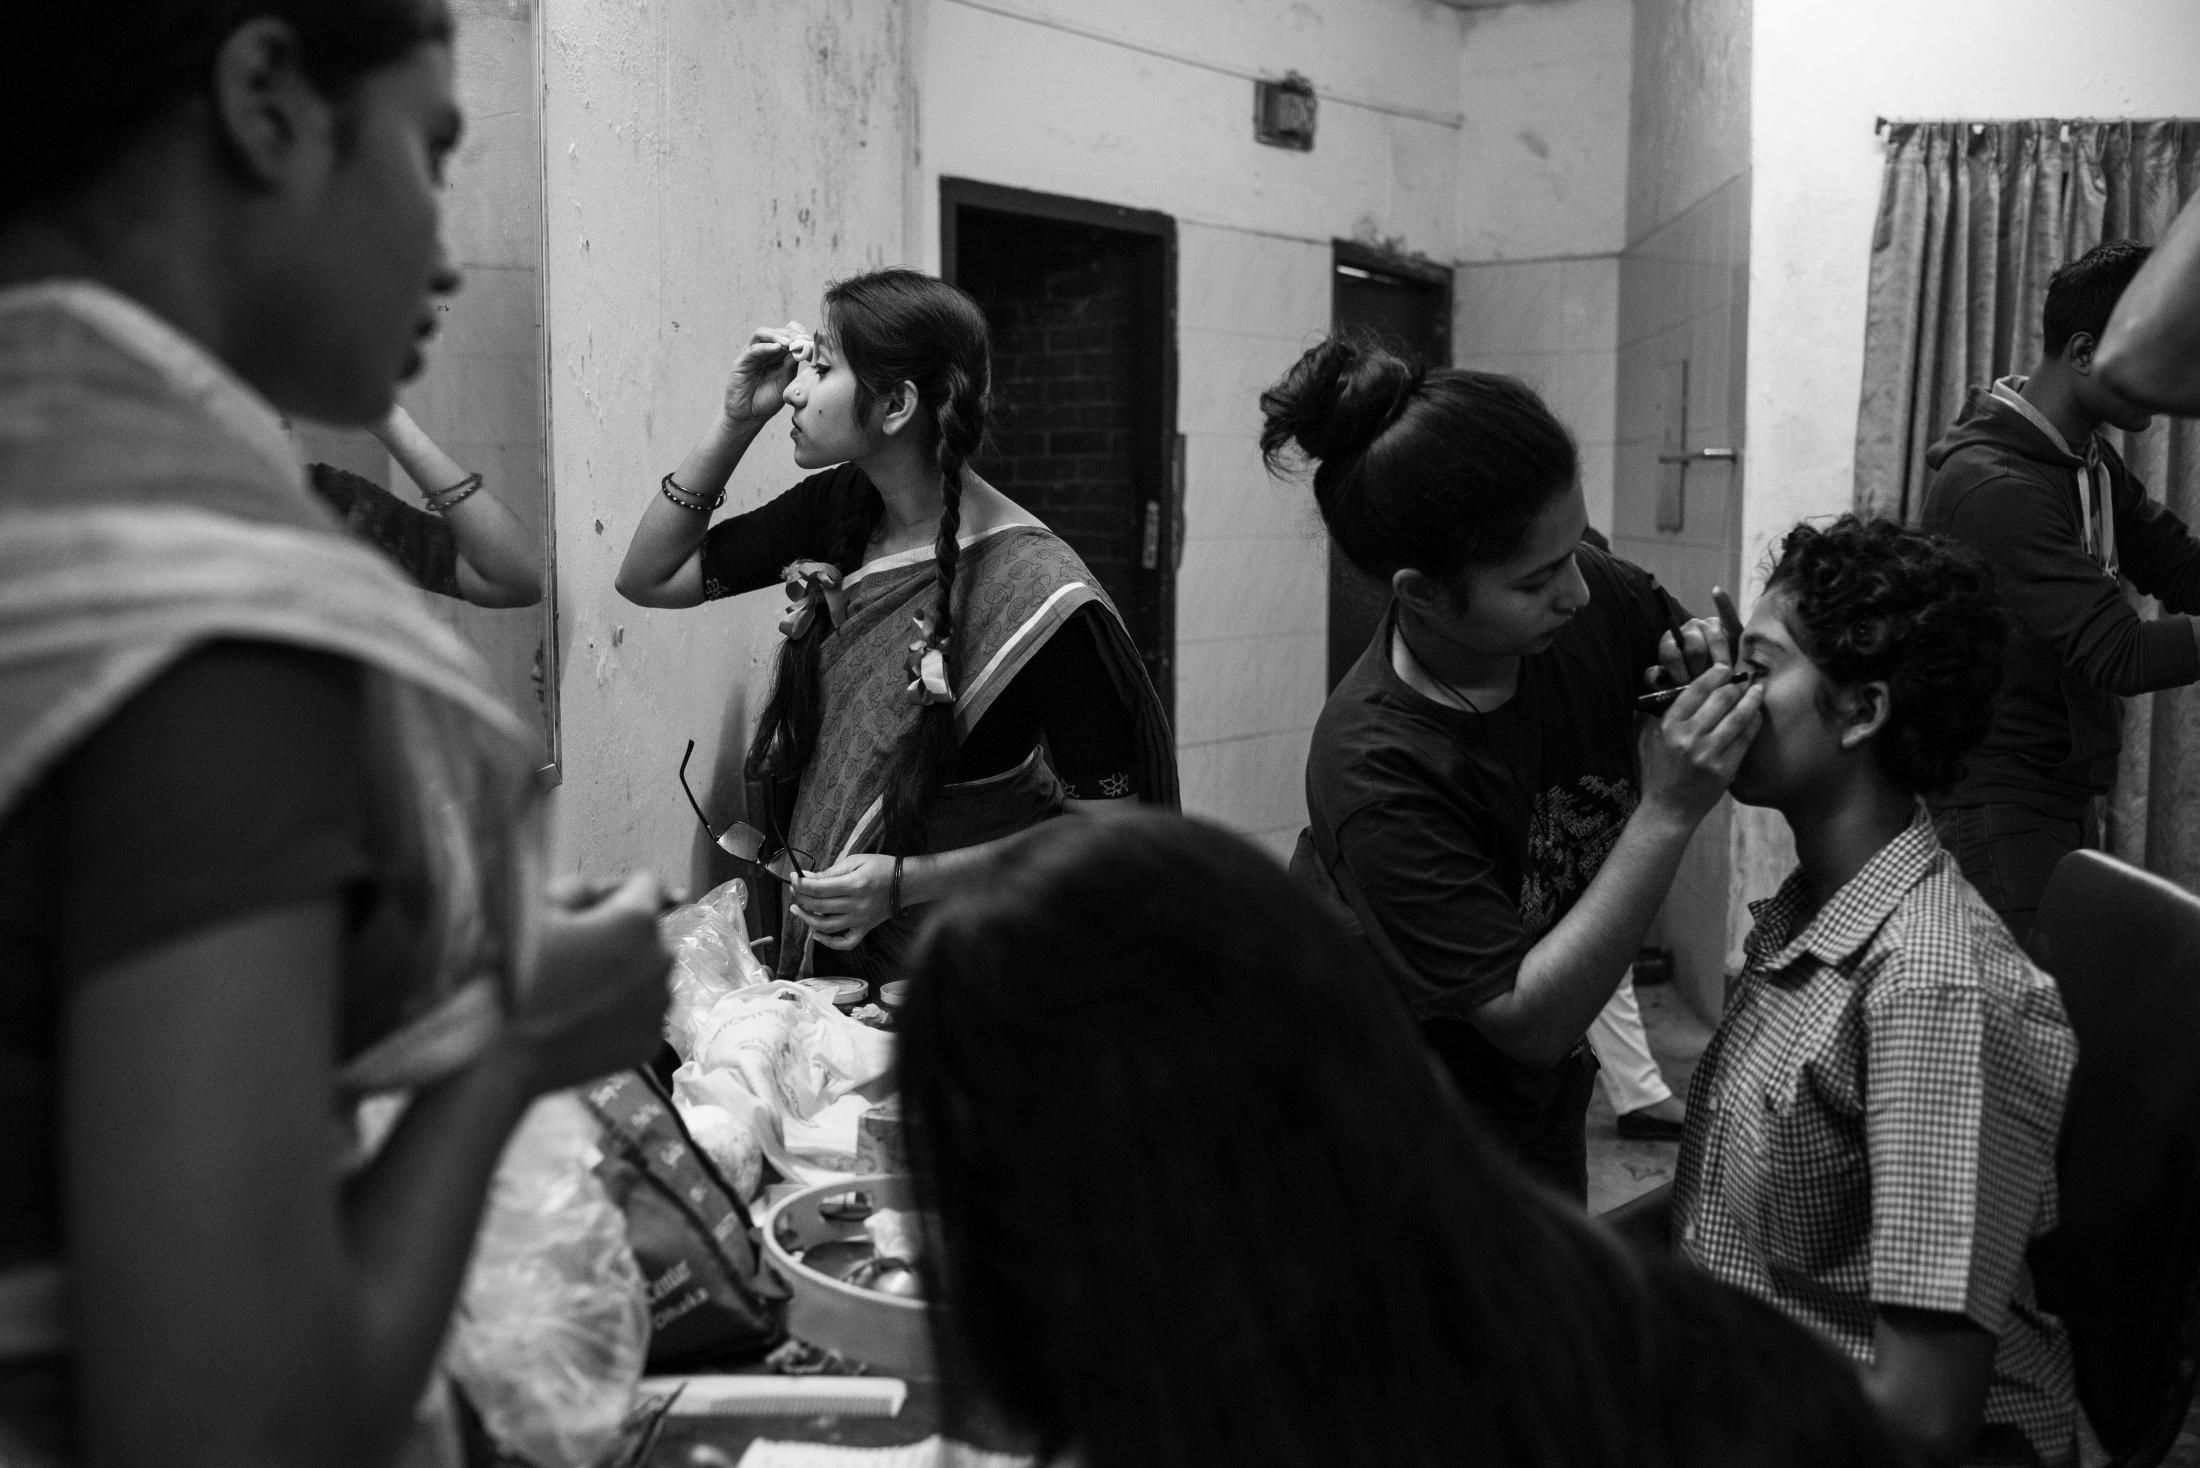 The Unseen Stage - Performers are busy in taking makeup before the drama.